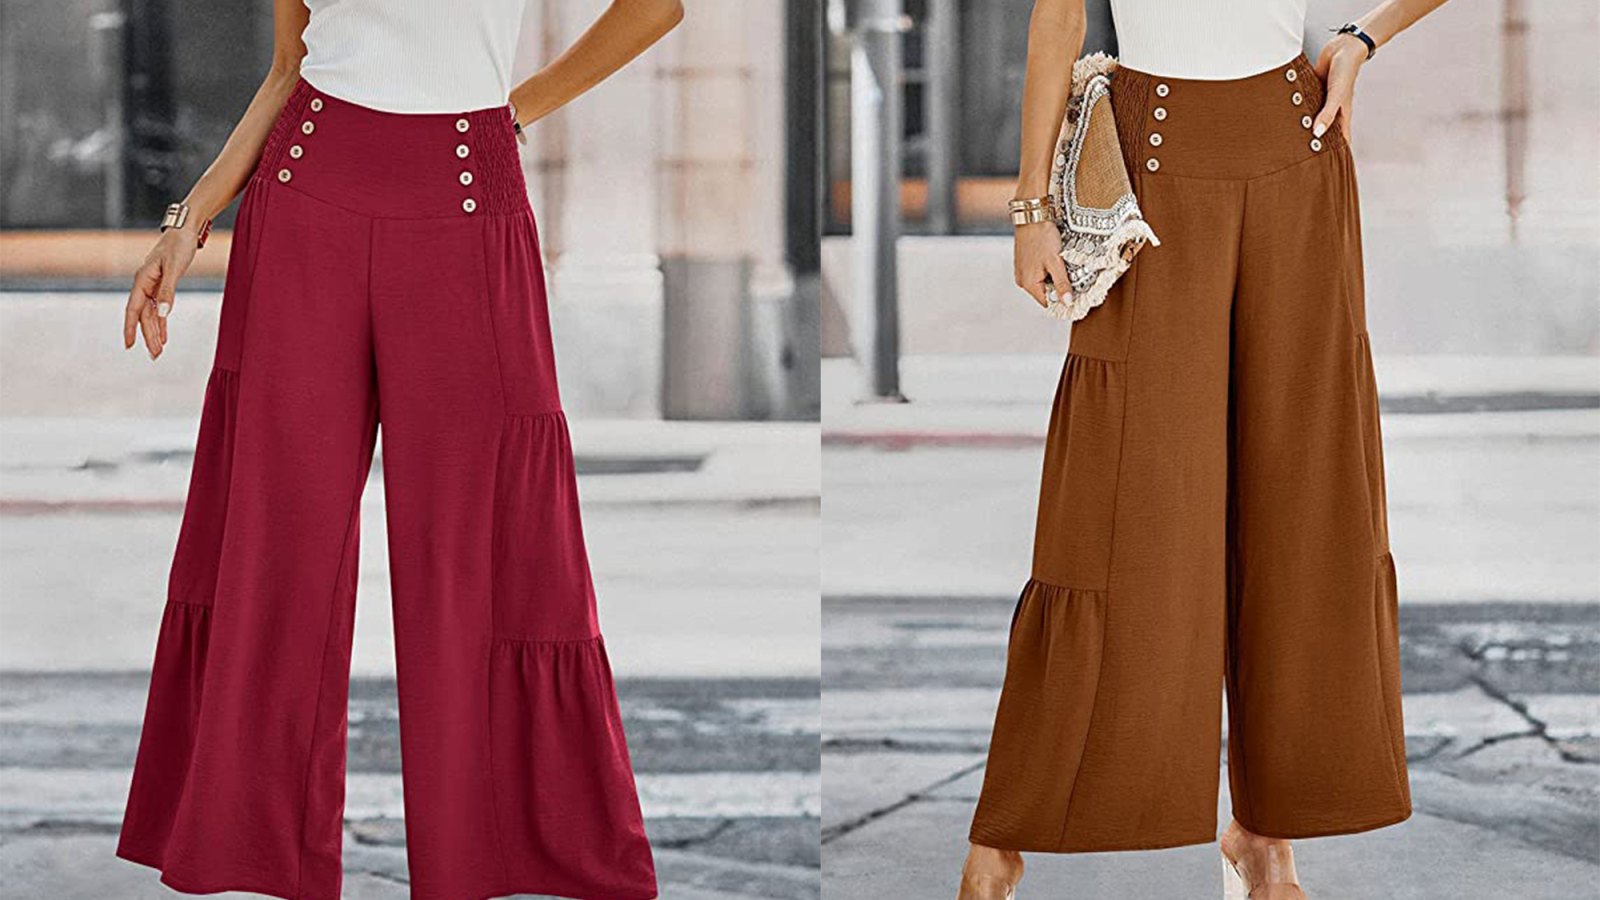 Prettygarden Lightweight Palazzo Pants Are a Must for Spring